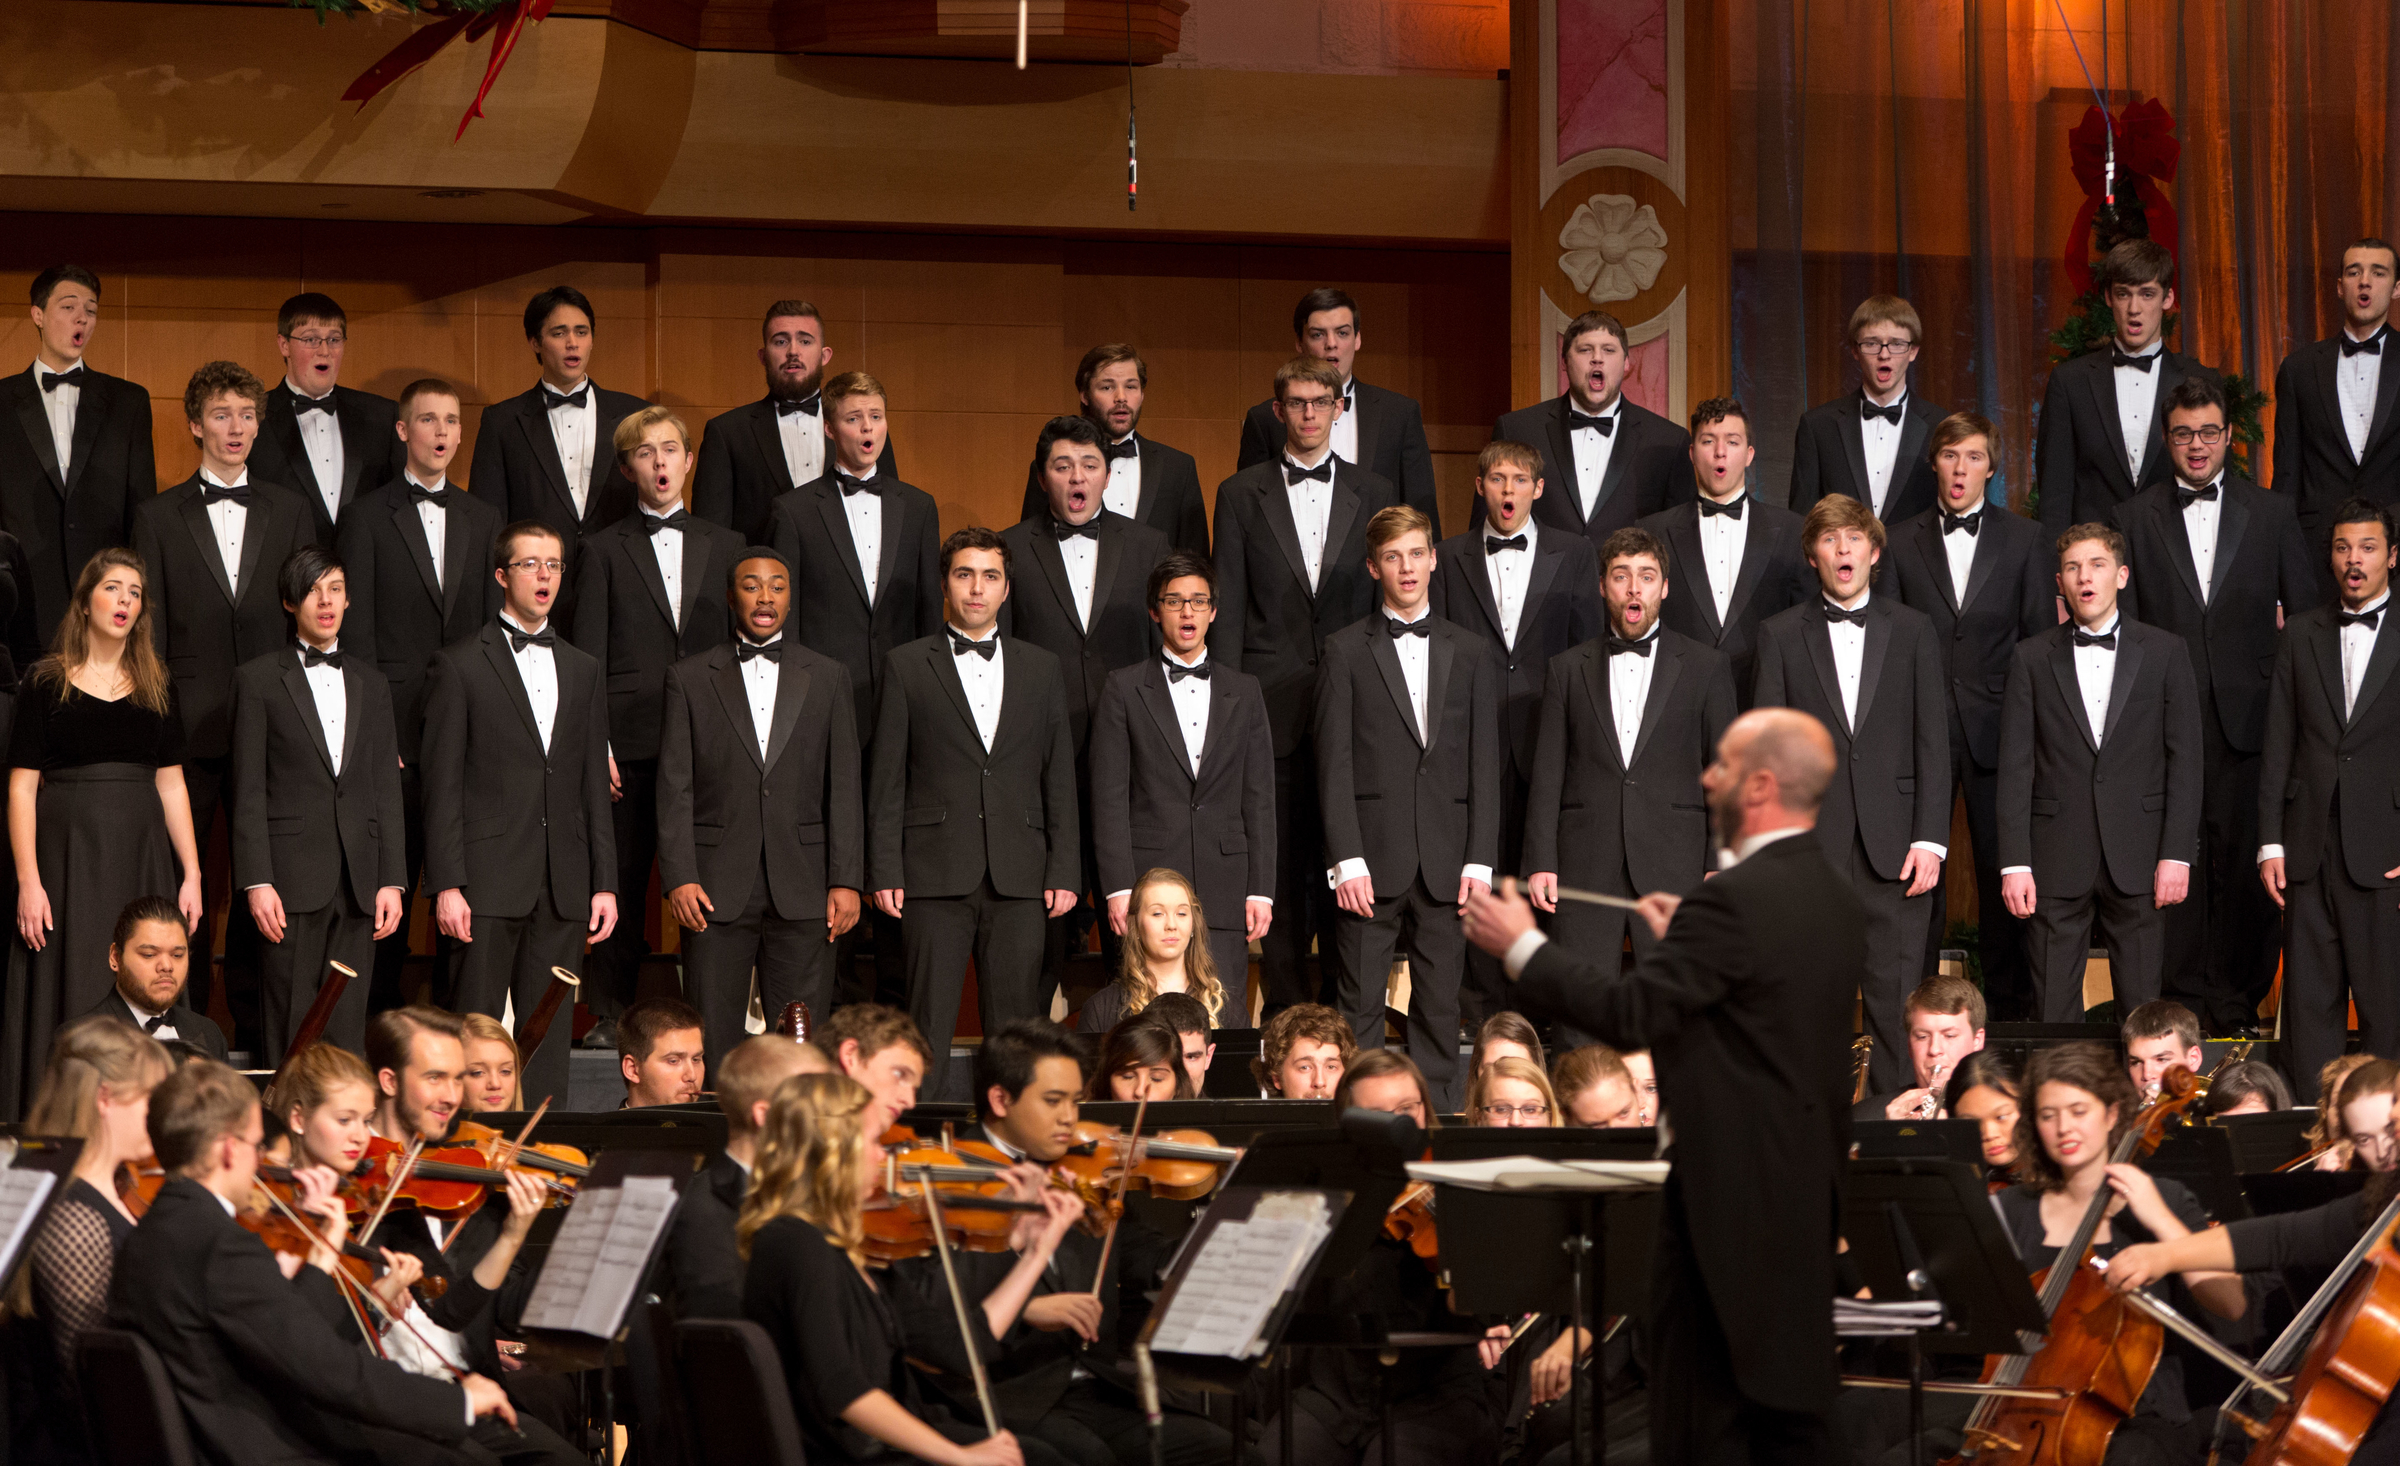 PLU Christmas featuring Angela Meade with the Choir of the West, the University Chorale and the University Orchestra at PLU on Friday, Dec. 11, 2015. (Photo: John Froschauer/PLU)